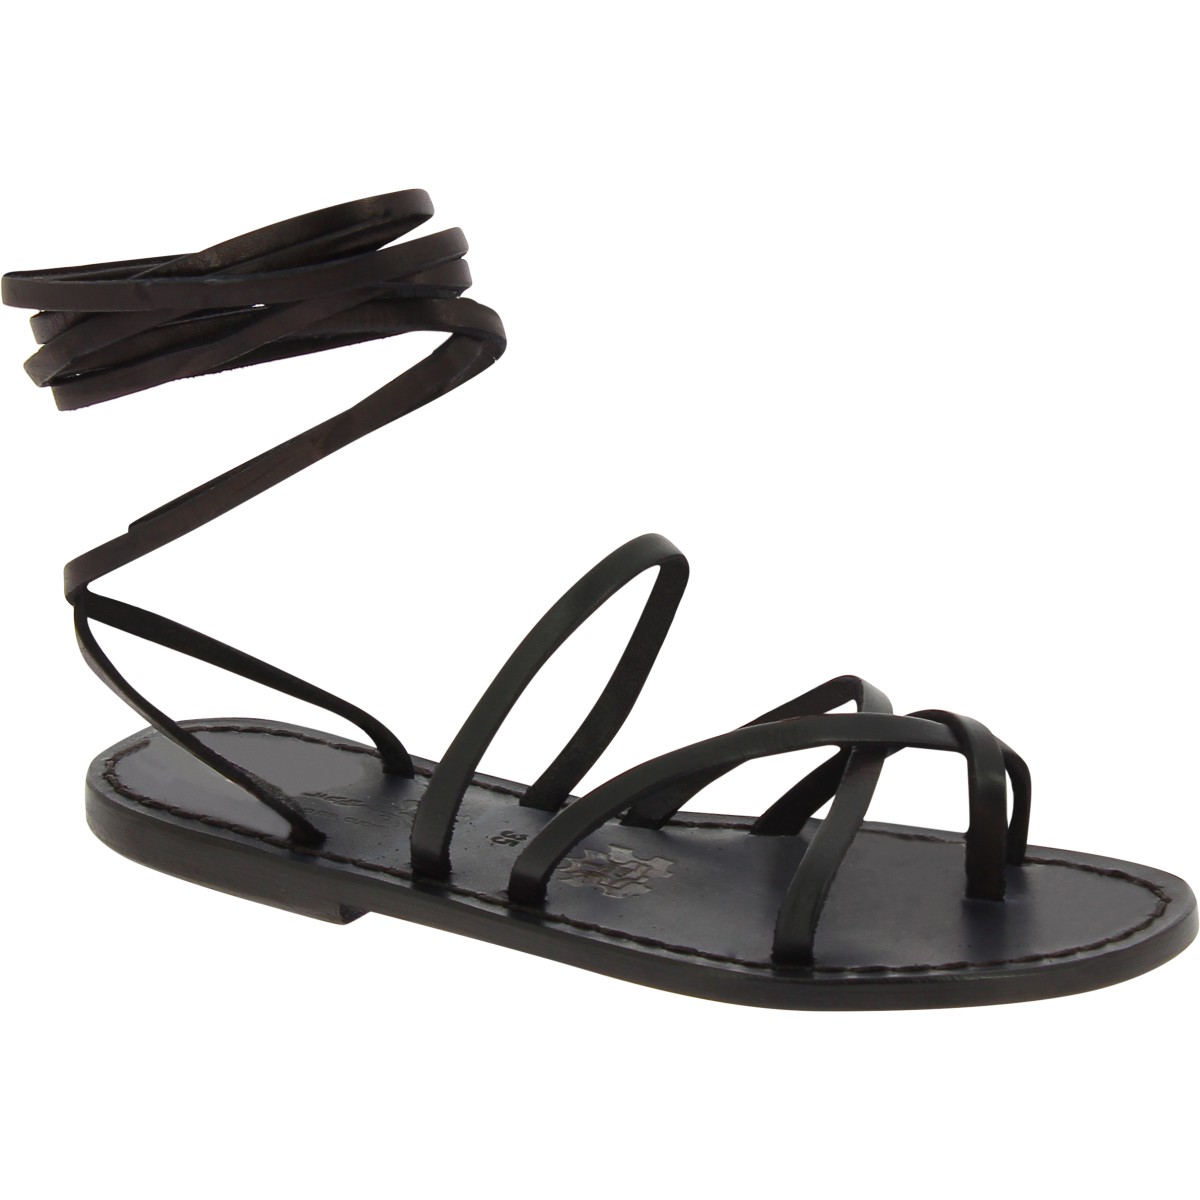 Women's black strappy leather sandals handmade in Italy | The leather ...